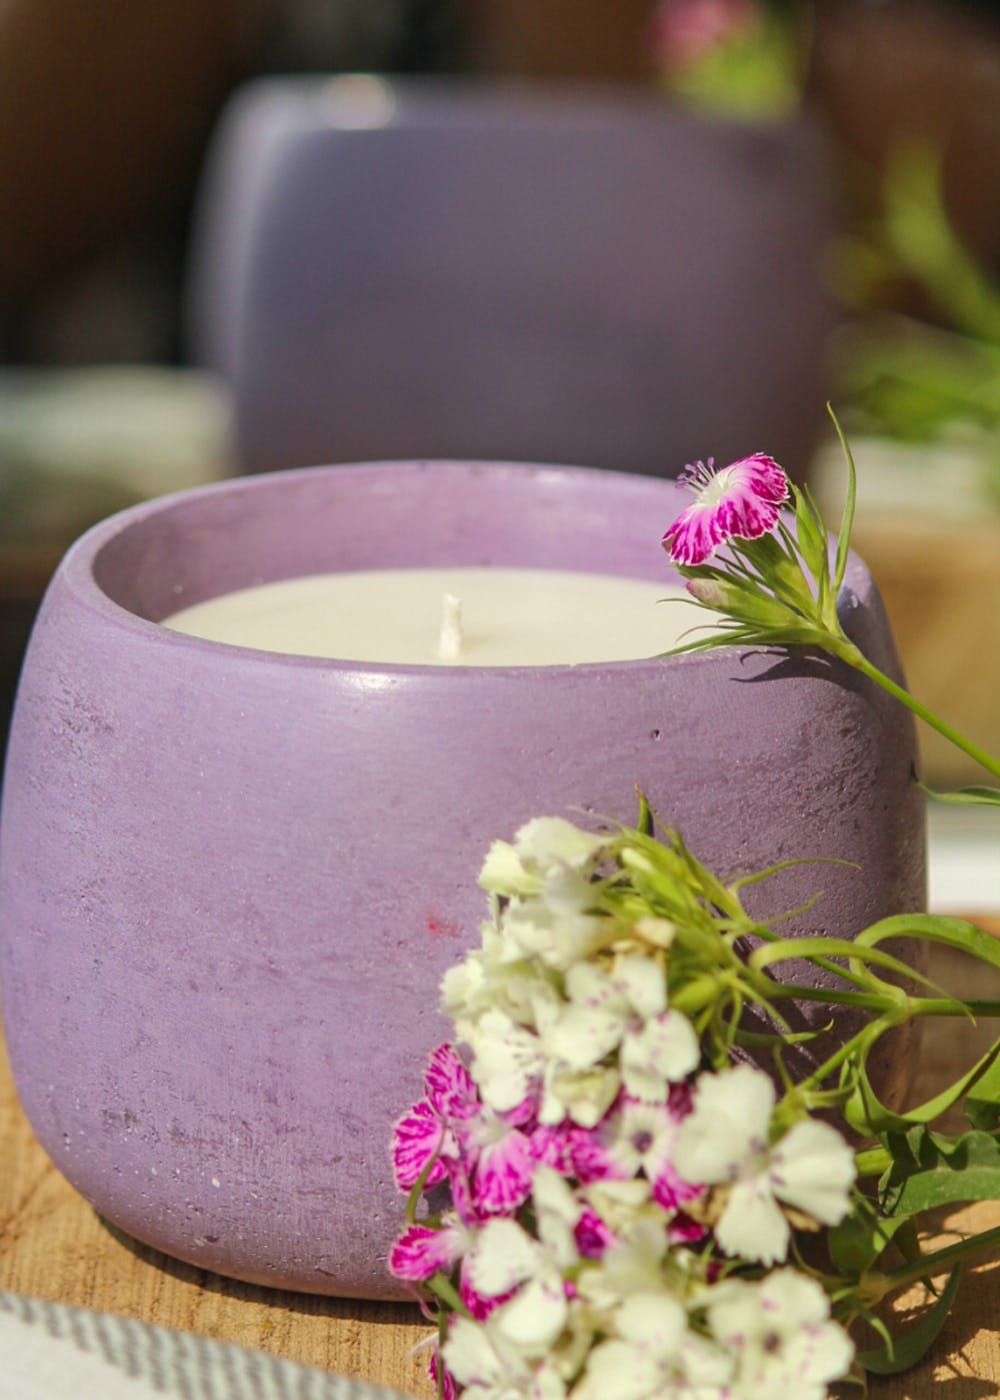 Lavender Candle